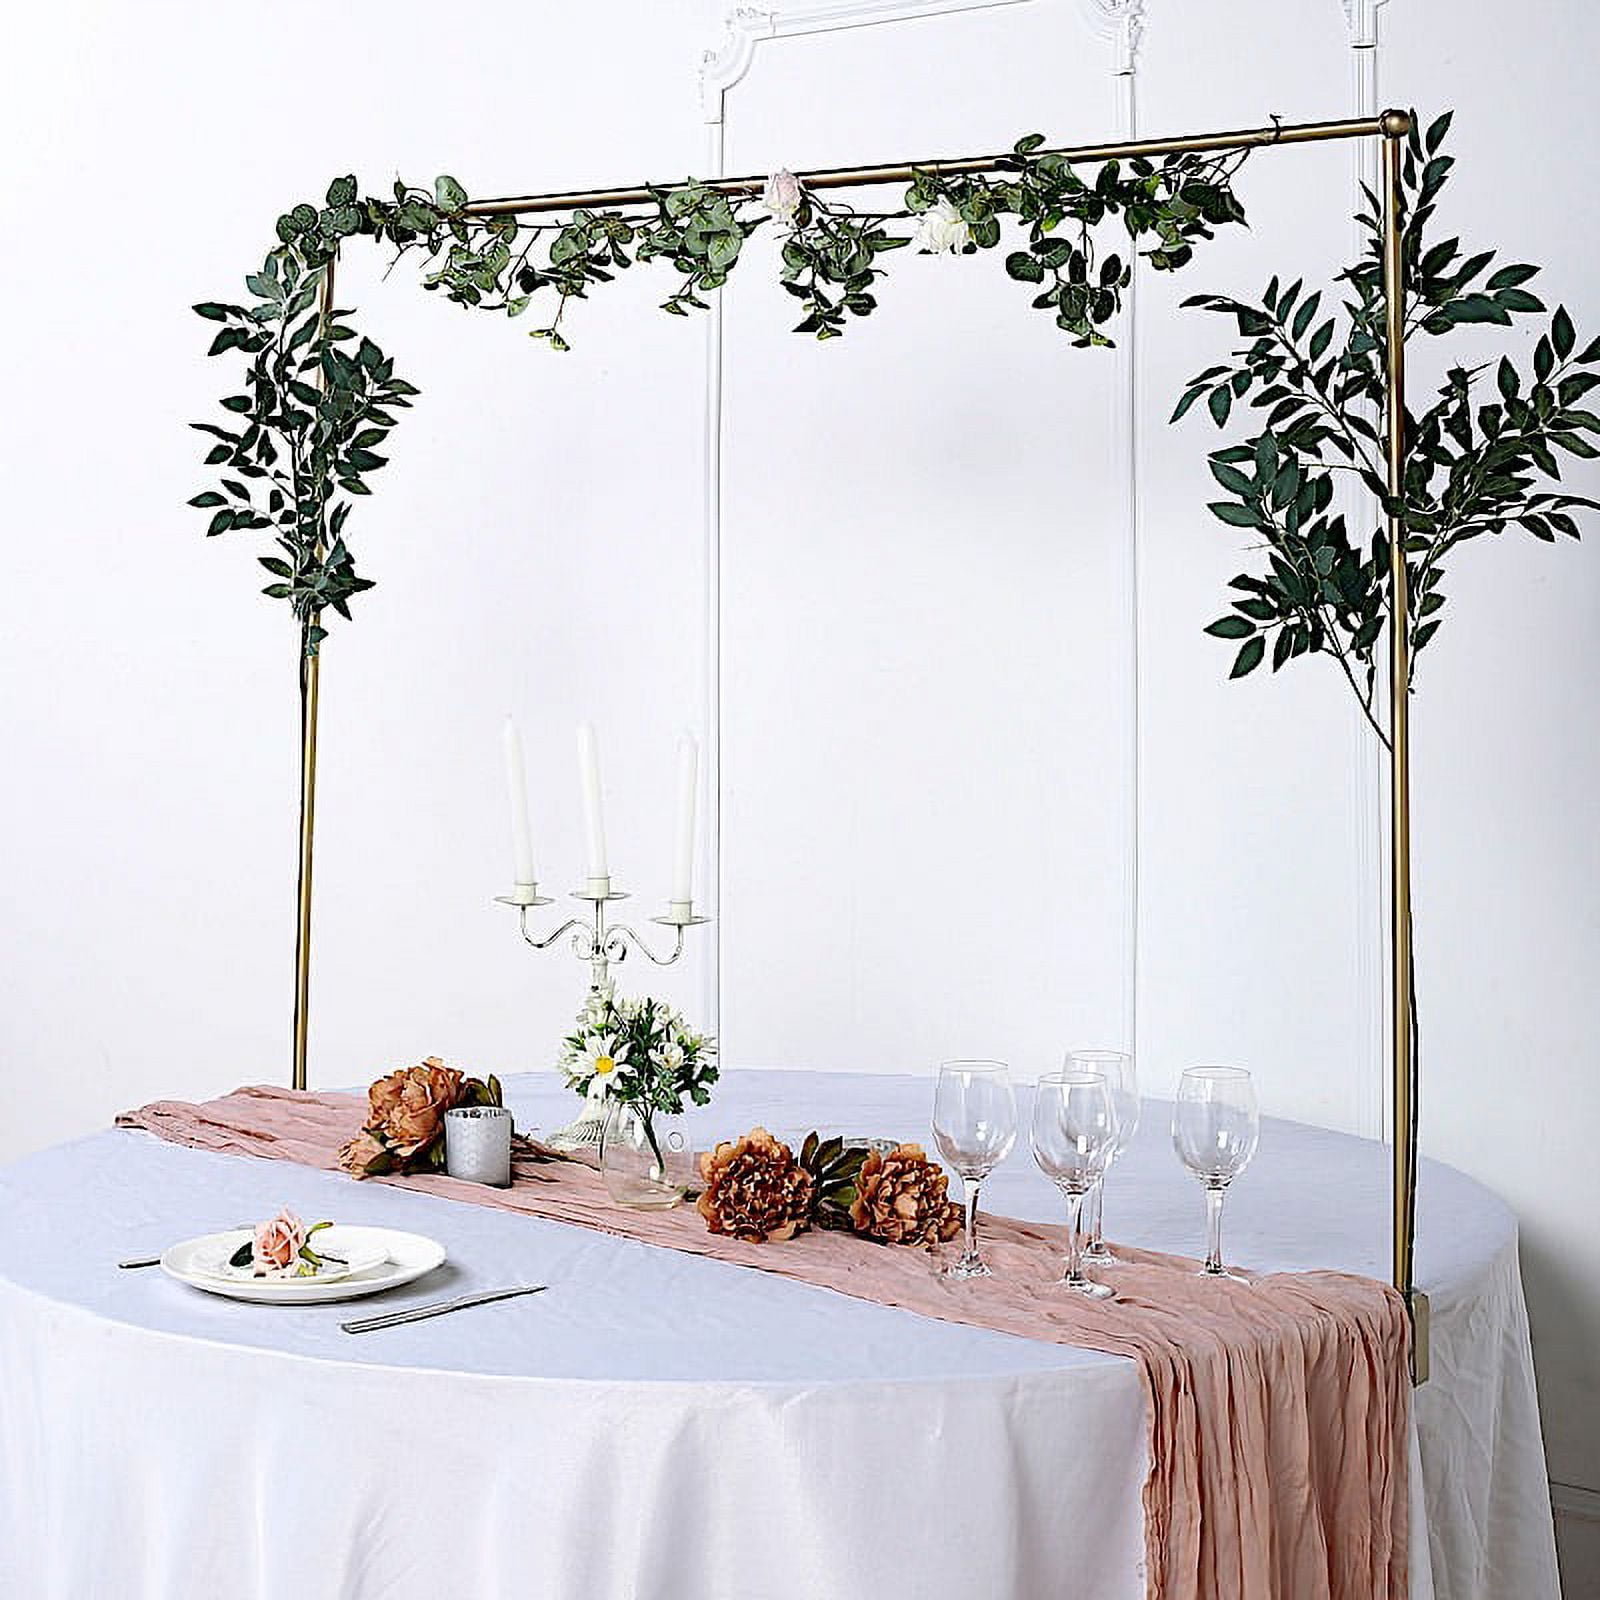  Adjustable Over The Table Rod Stand with Clamps, Gold Metal  Balloon Flower Arch Stand 35-50Tall, 45-90Length Ideal for Weddings,  Showers, Birthday, Halloween, Thanksgiving Party Decorations : Home &  Kitchen